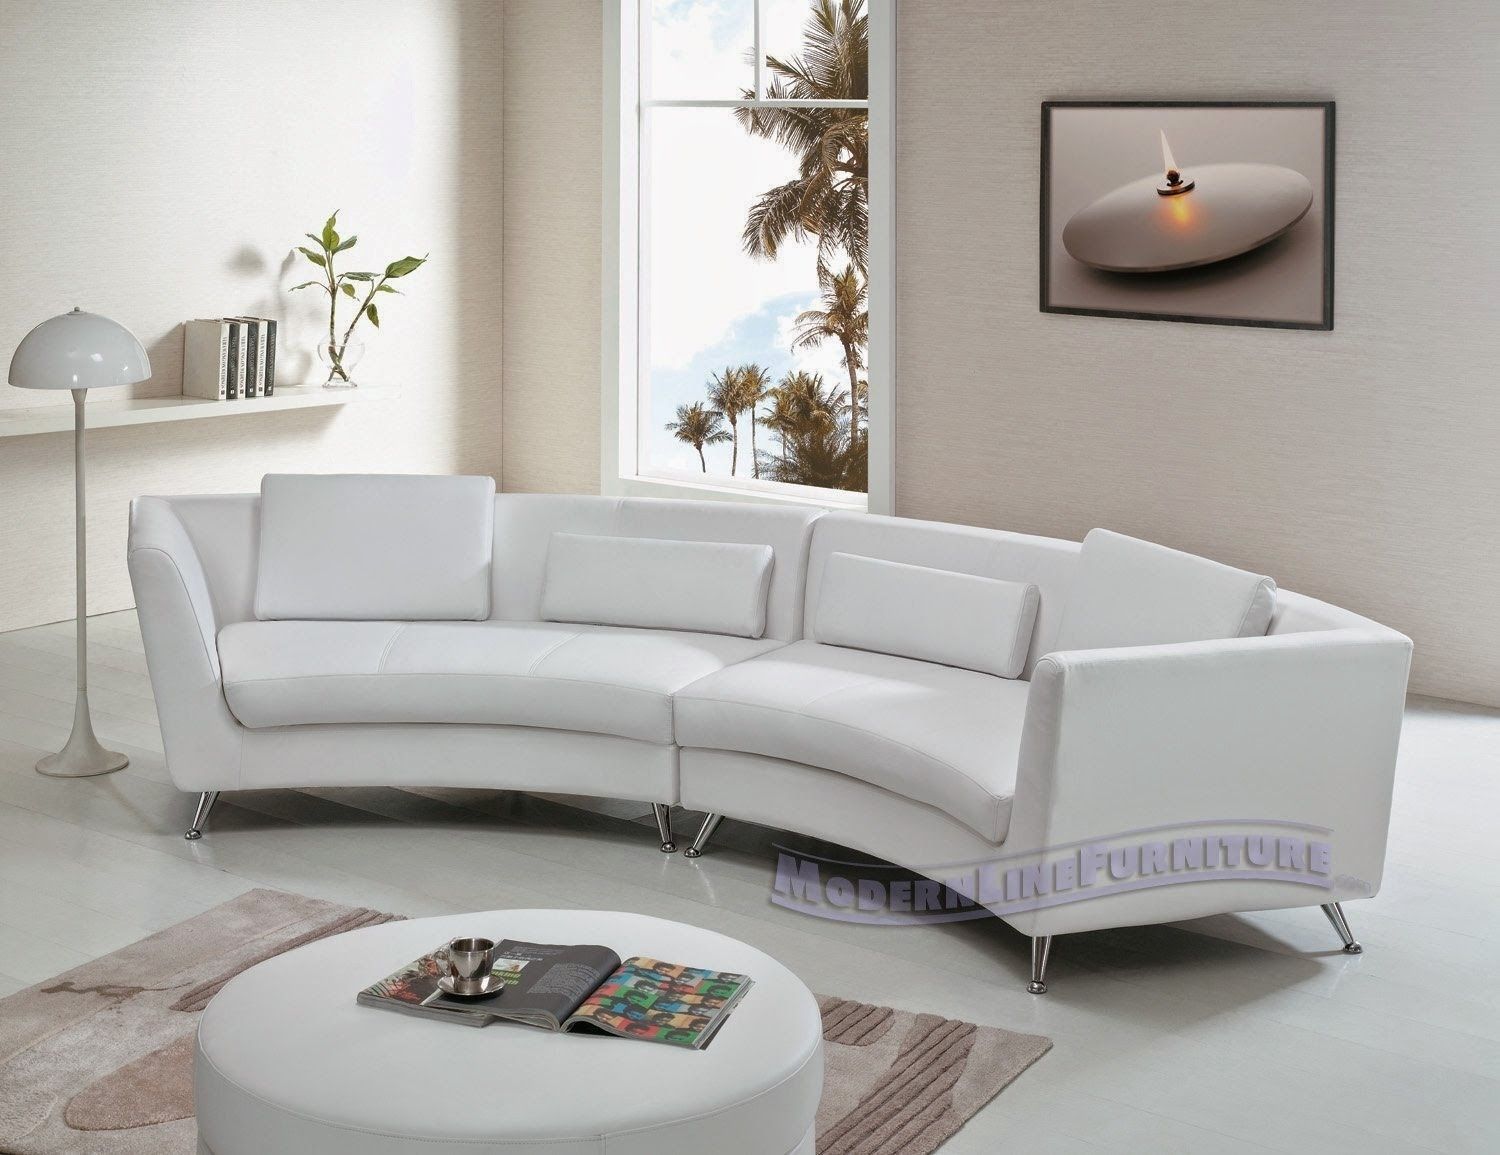 Simple The Bay Sectional Sofa 60 For Your Sectional Sofa Bed Toronto With The Bay Sectional Sofas (View 4 of 10)